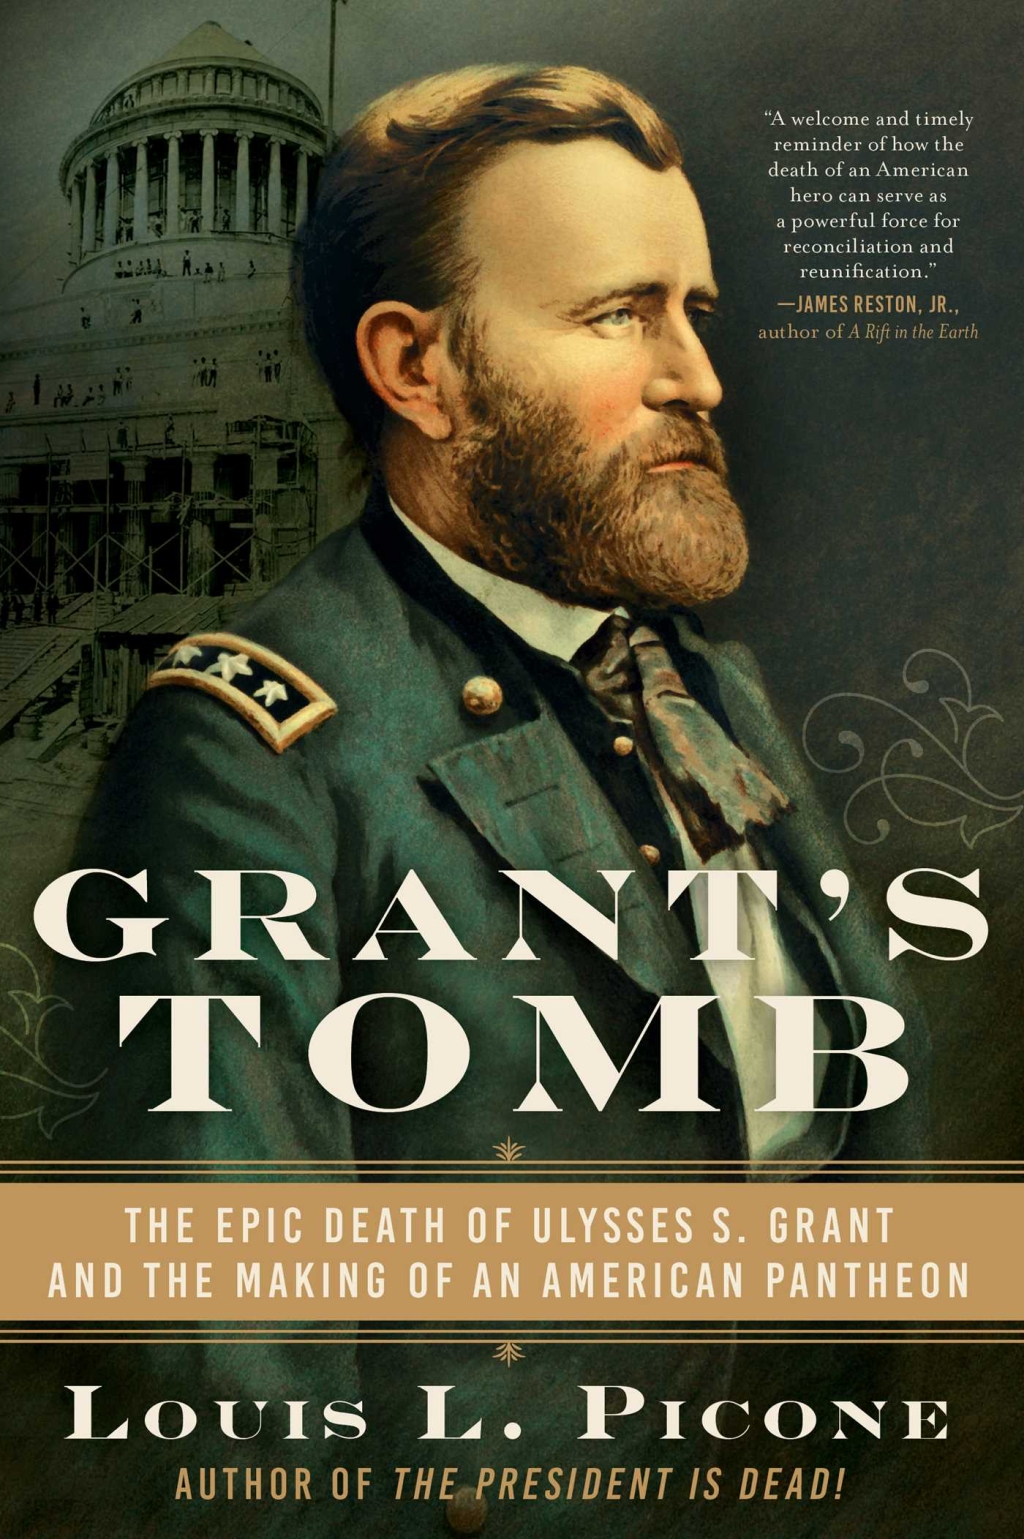 Cover of the 2021 book " Grant's Tomb: The Epic Death of Ulysses S. Grant and the Making of an American Pantheon" by Louis L. Picone